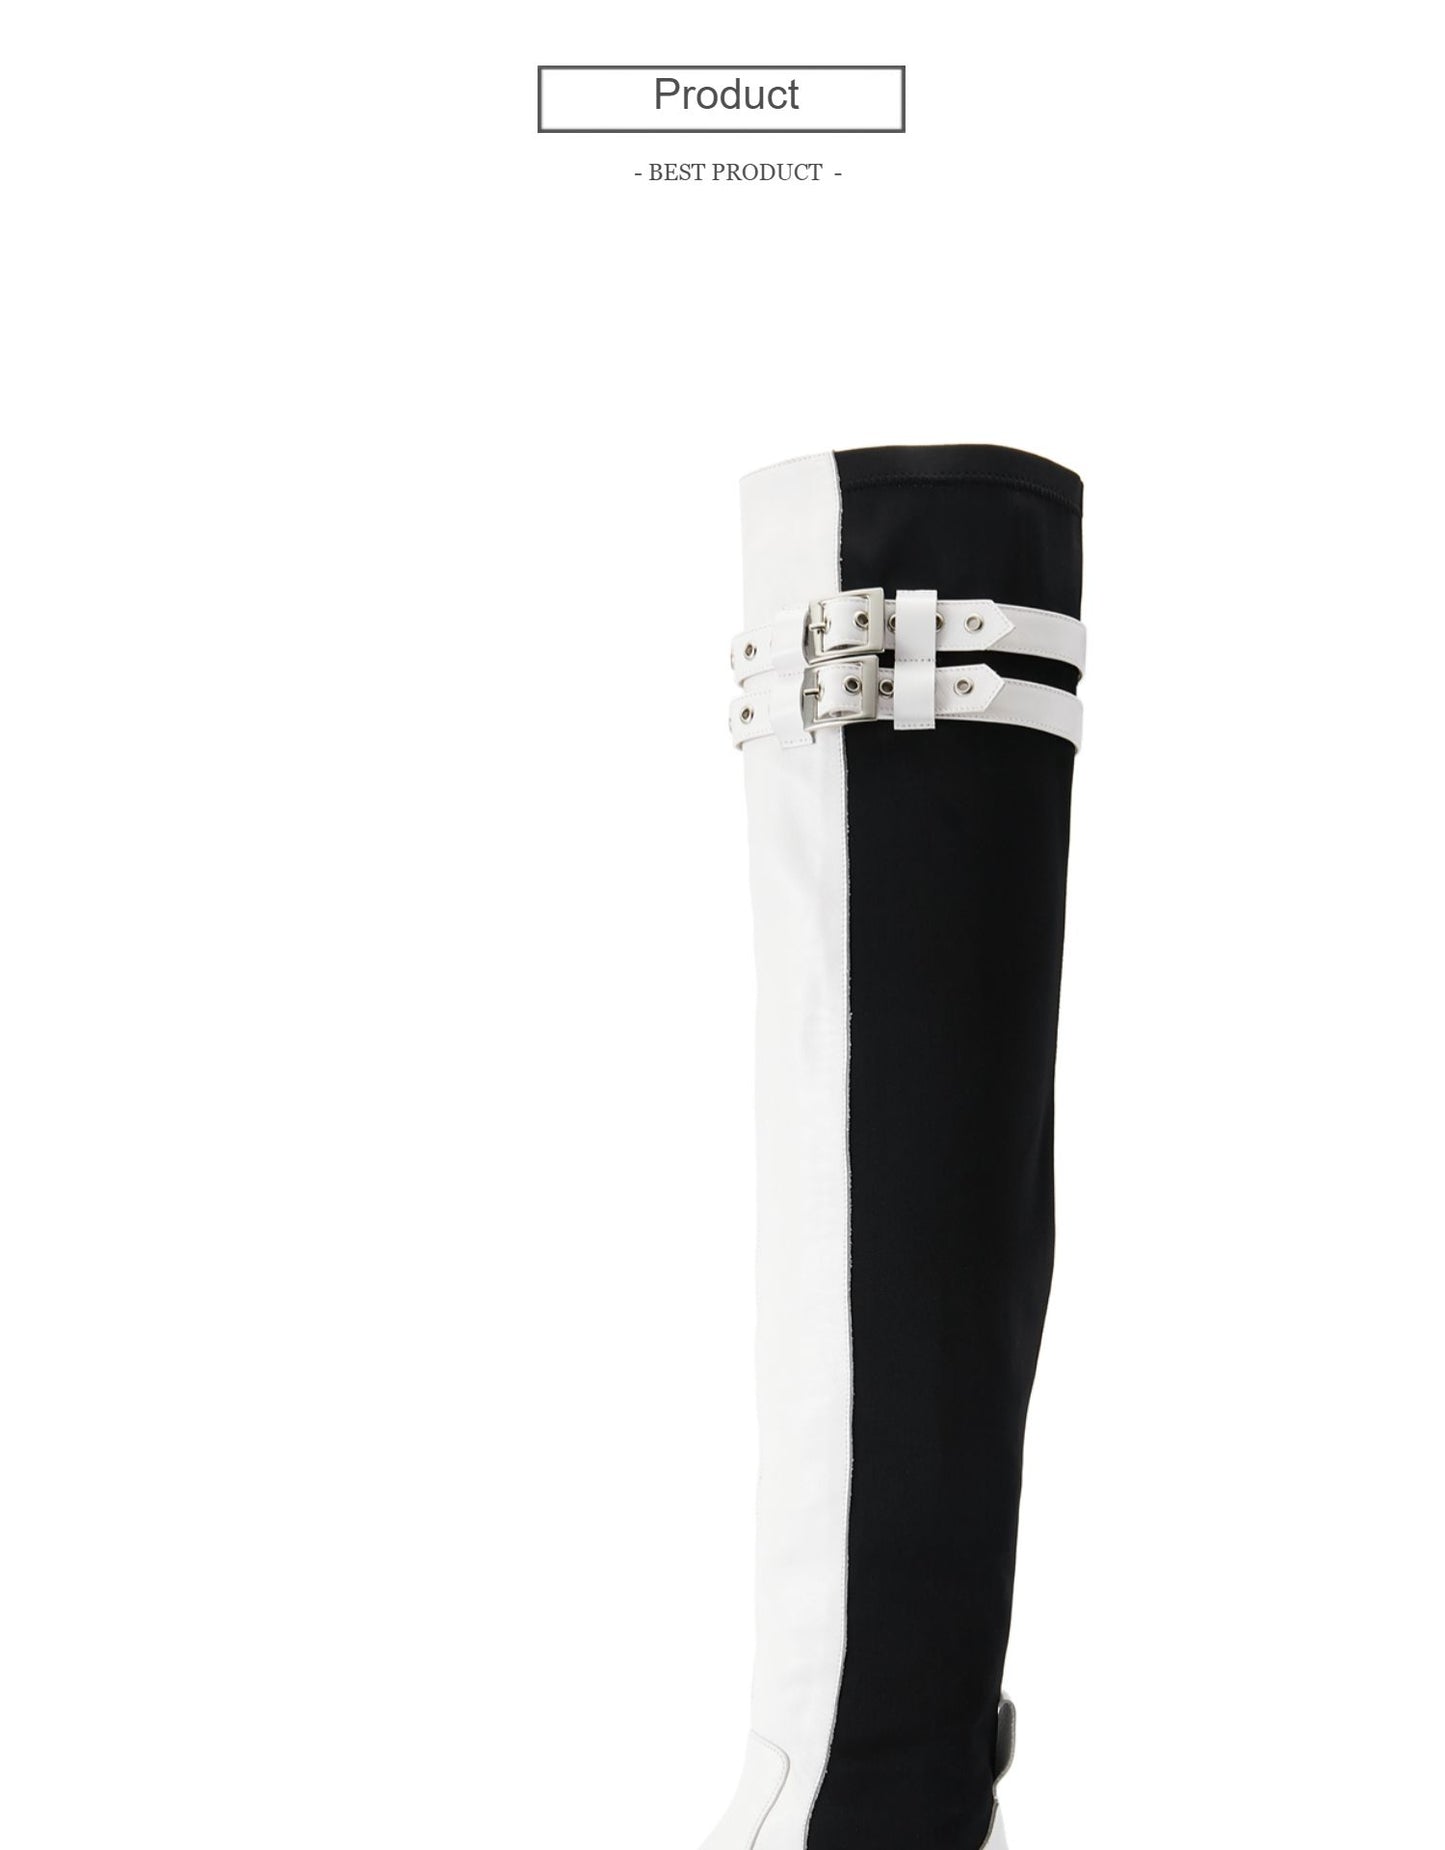 FEIFEI original niche design black and white elastic cloth cowhide over-the-knee high boots- Wila